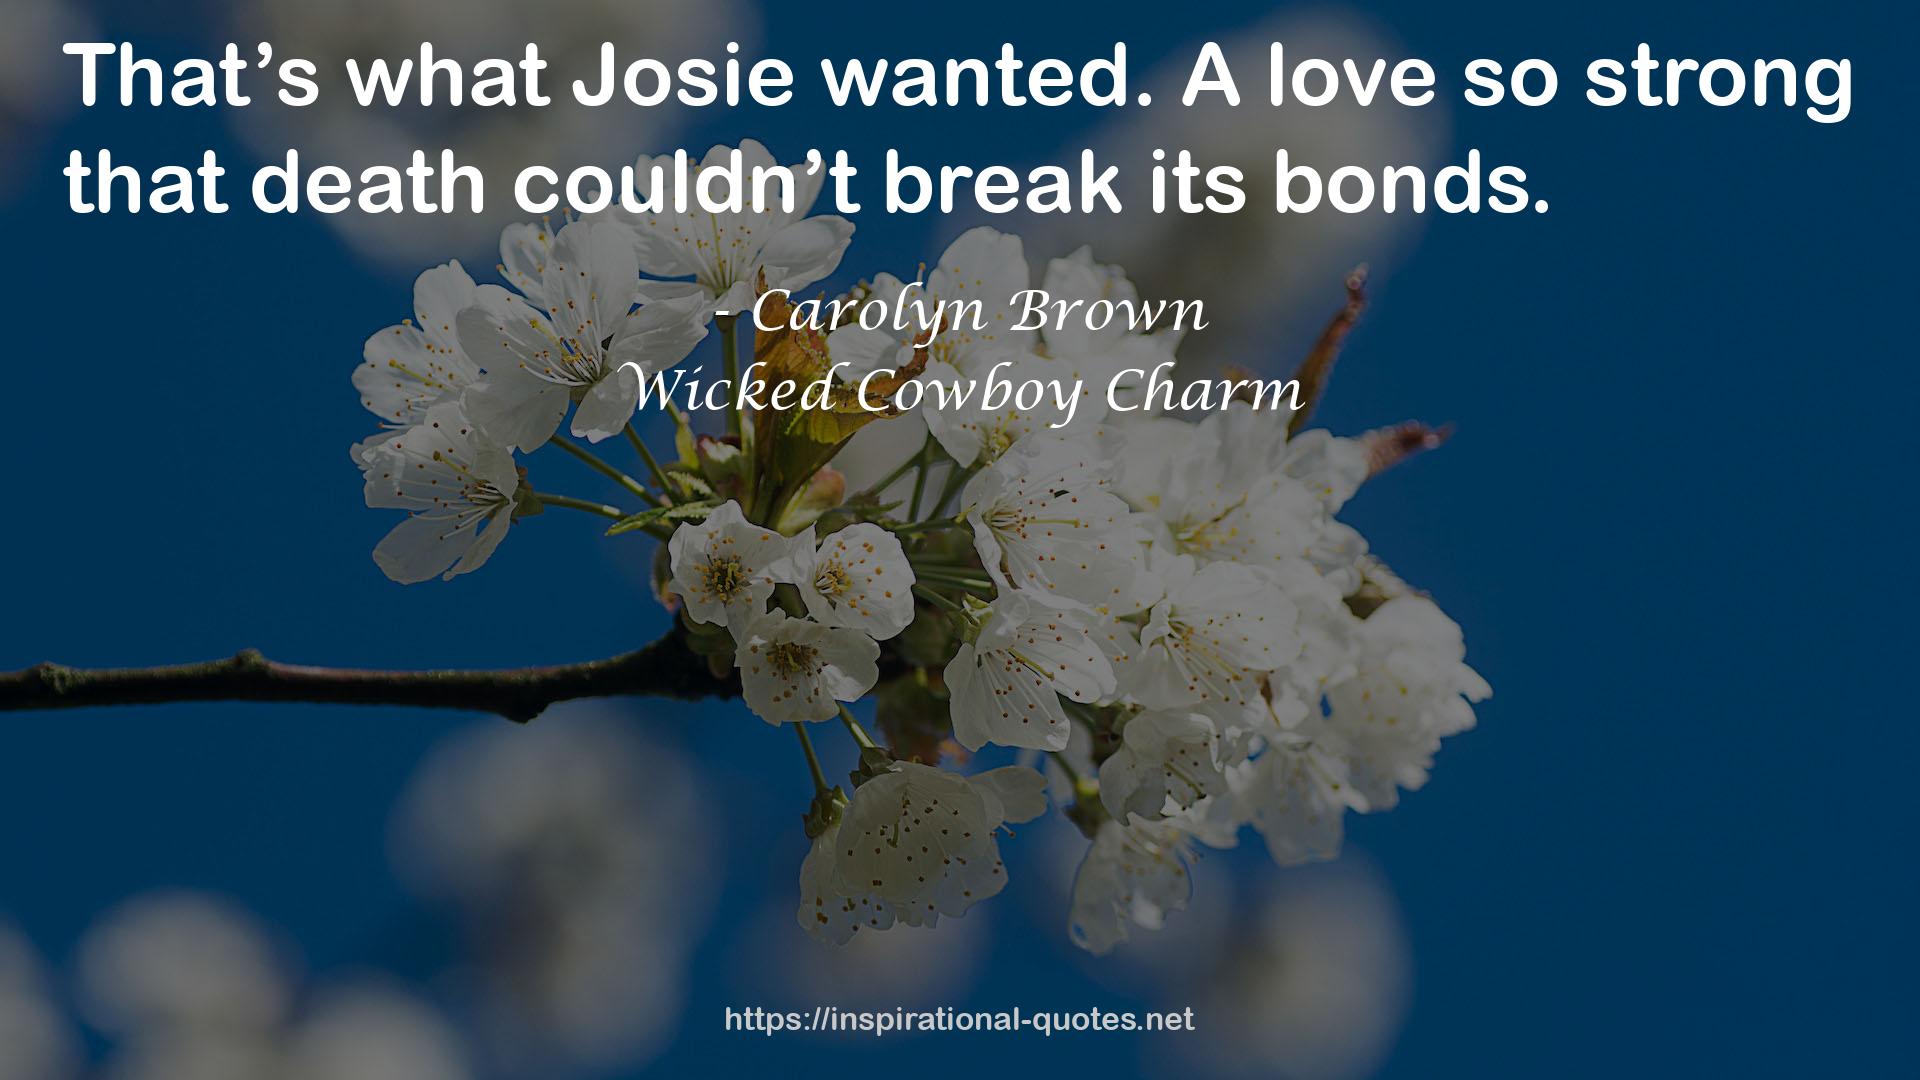 Wicked Cowboy Charm QUOTES